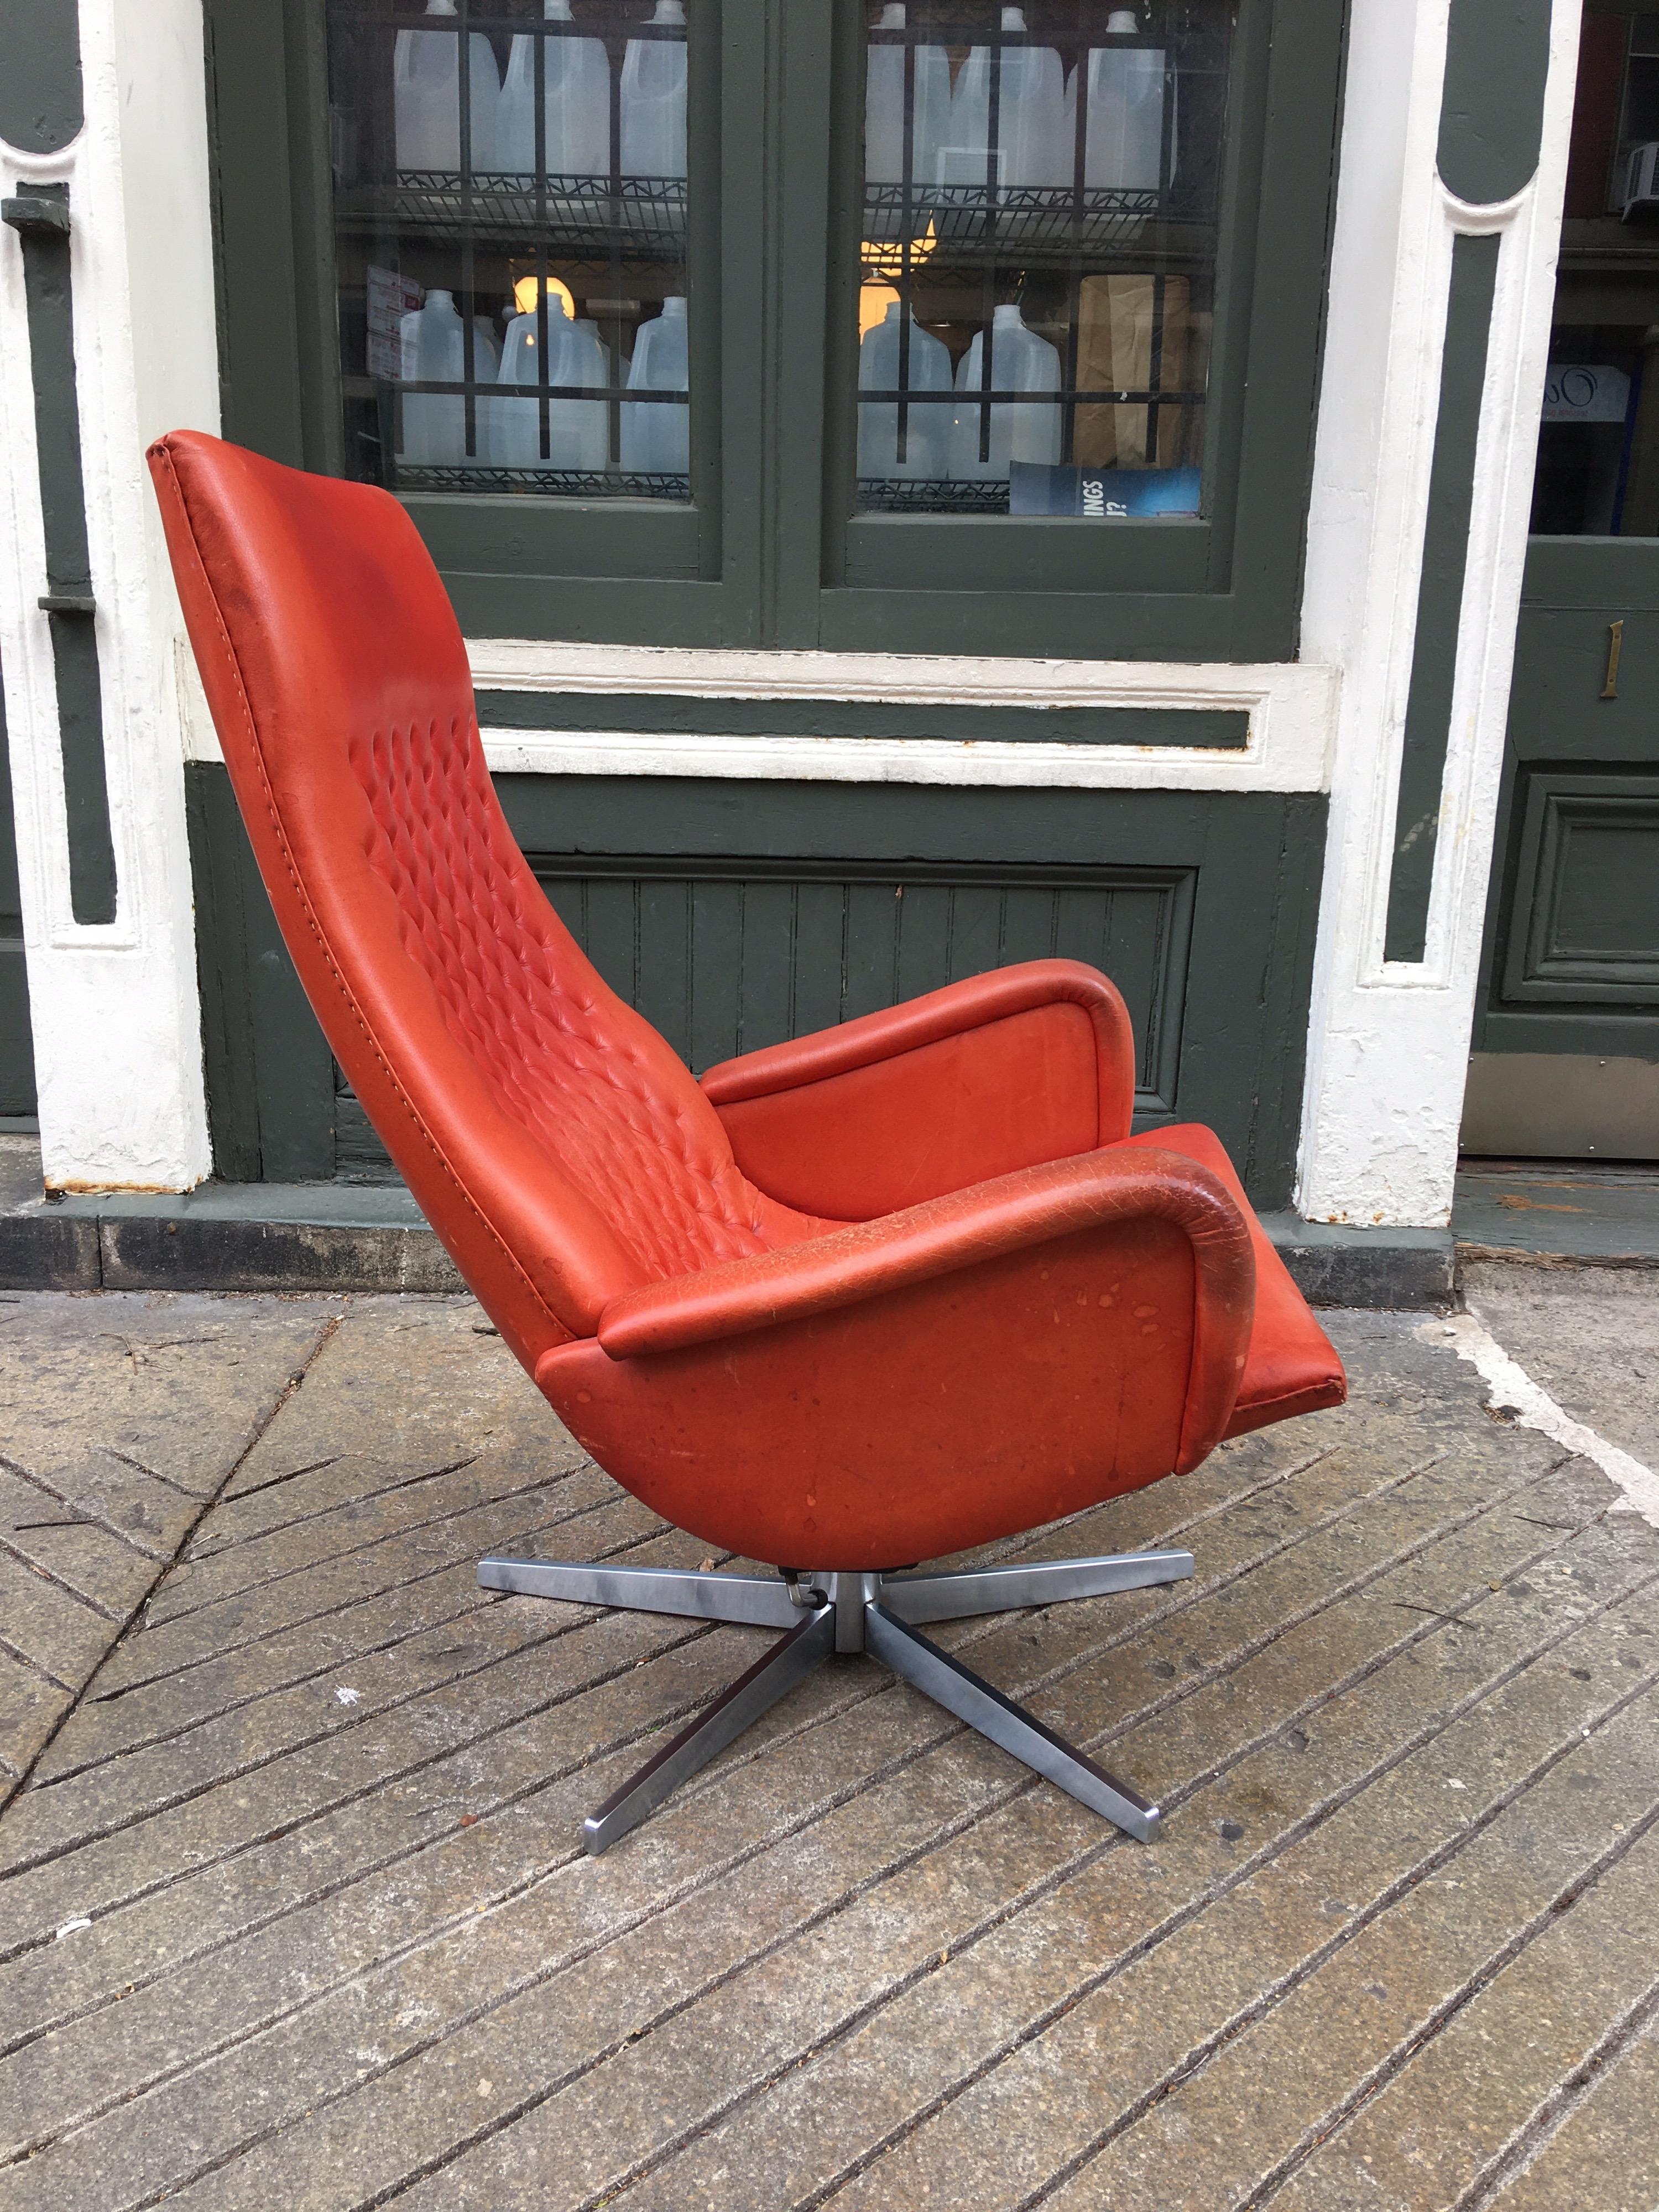 De Sede Model DS 51 Ox blood red lounge chair with adjustable tilt. Crazy comfortable! Hand pulled tufted back and all hand sewn seams! The cousin of the so called James Bond model S231, basically the same profile but much sleeker! Shows a nice